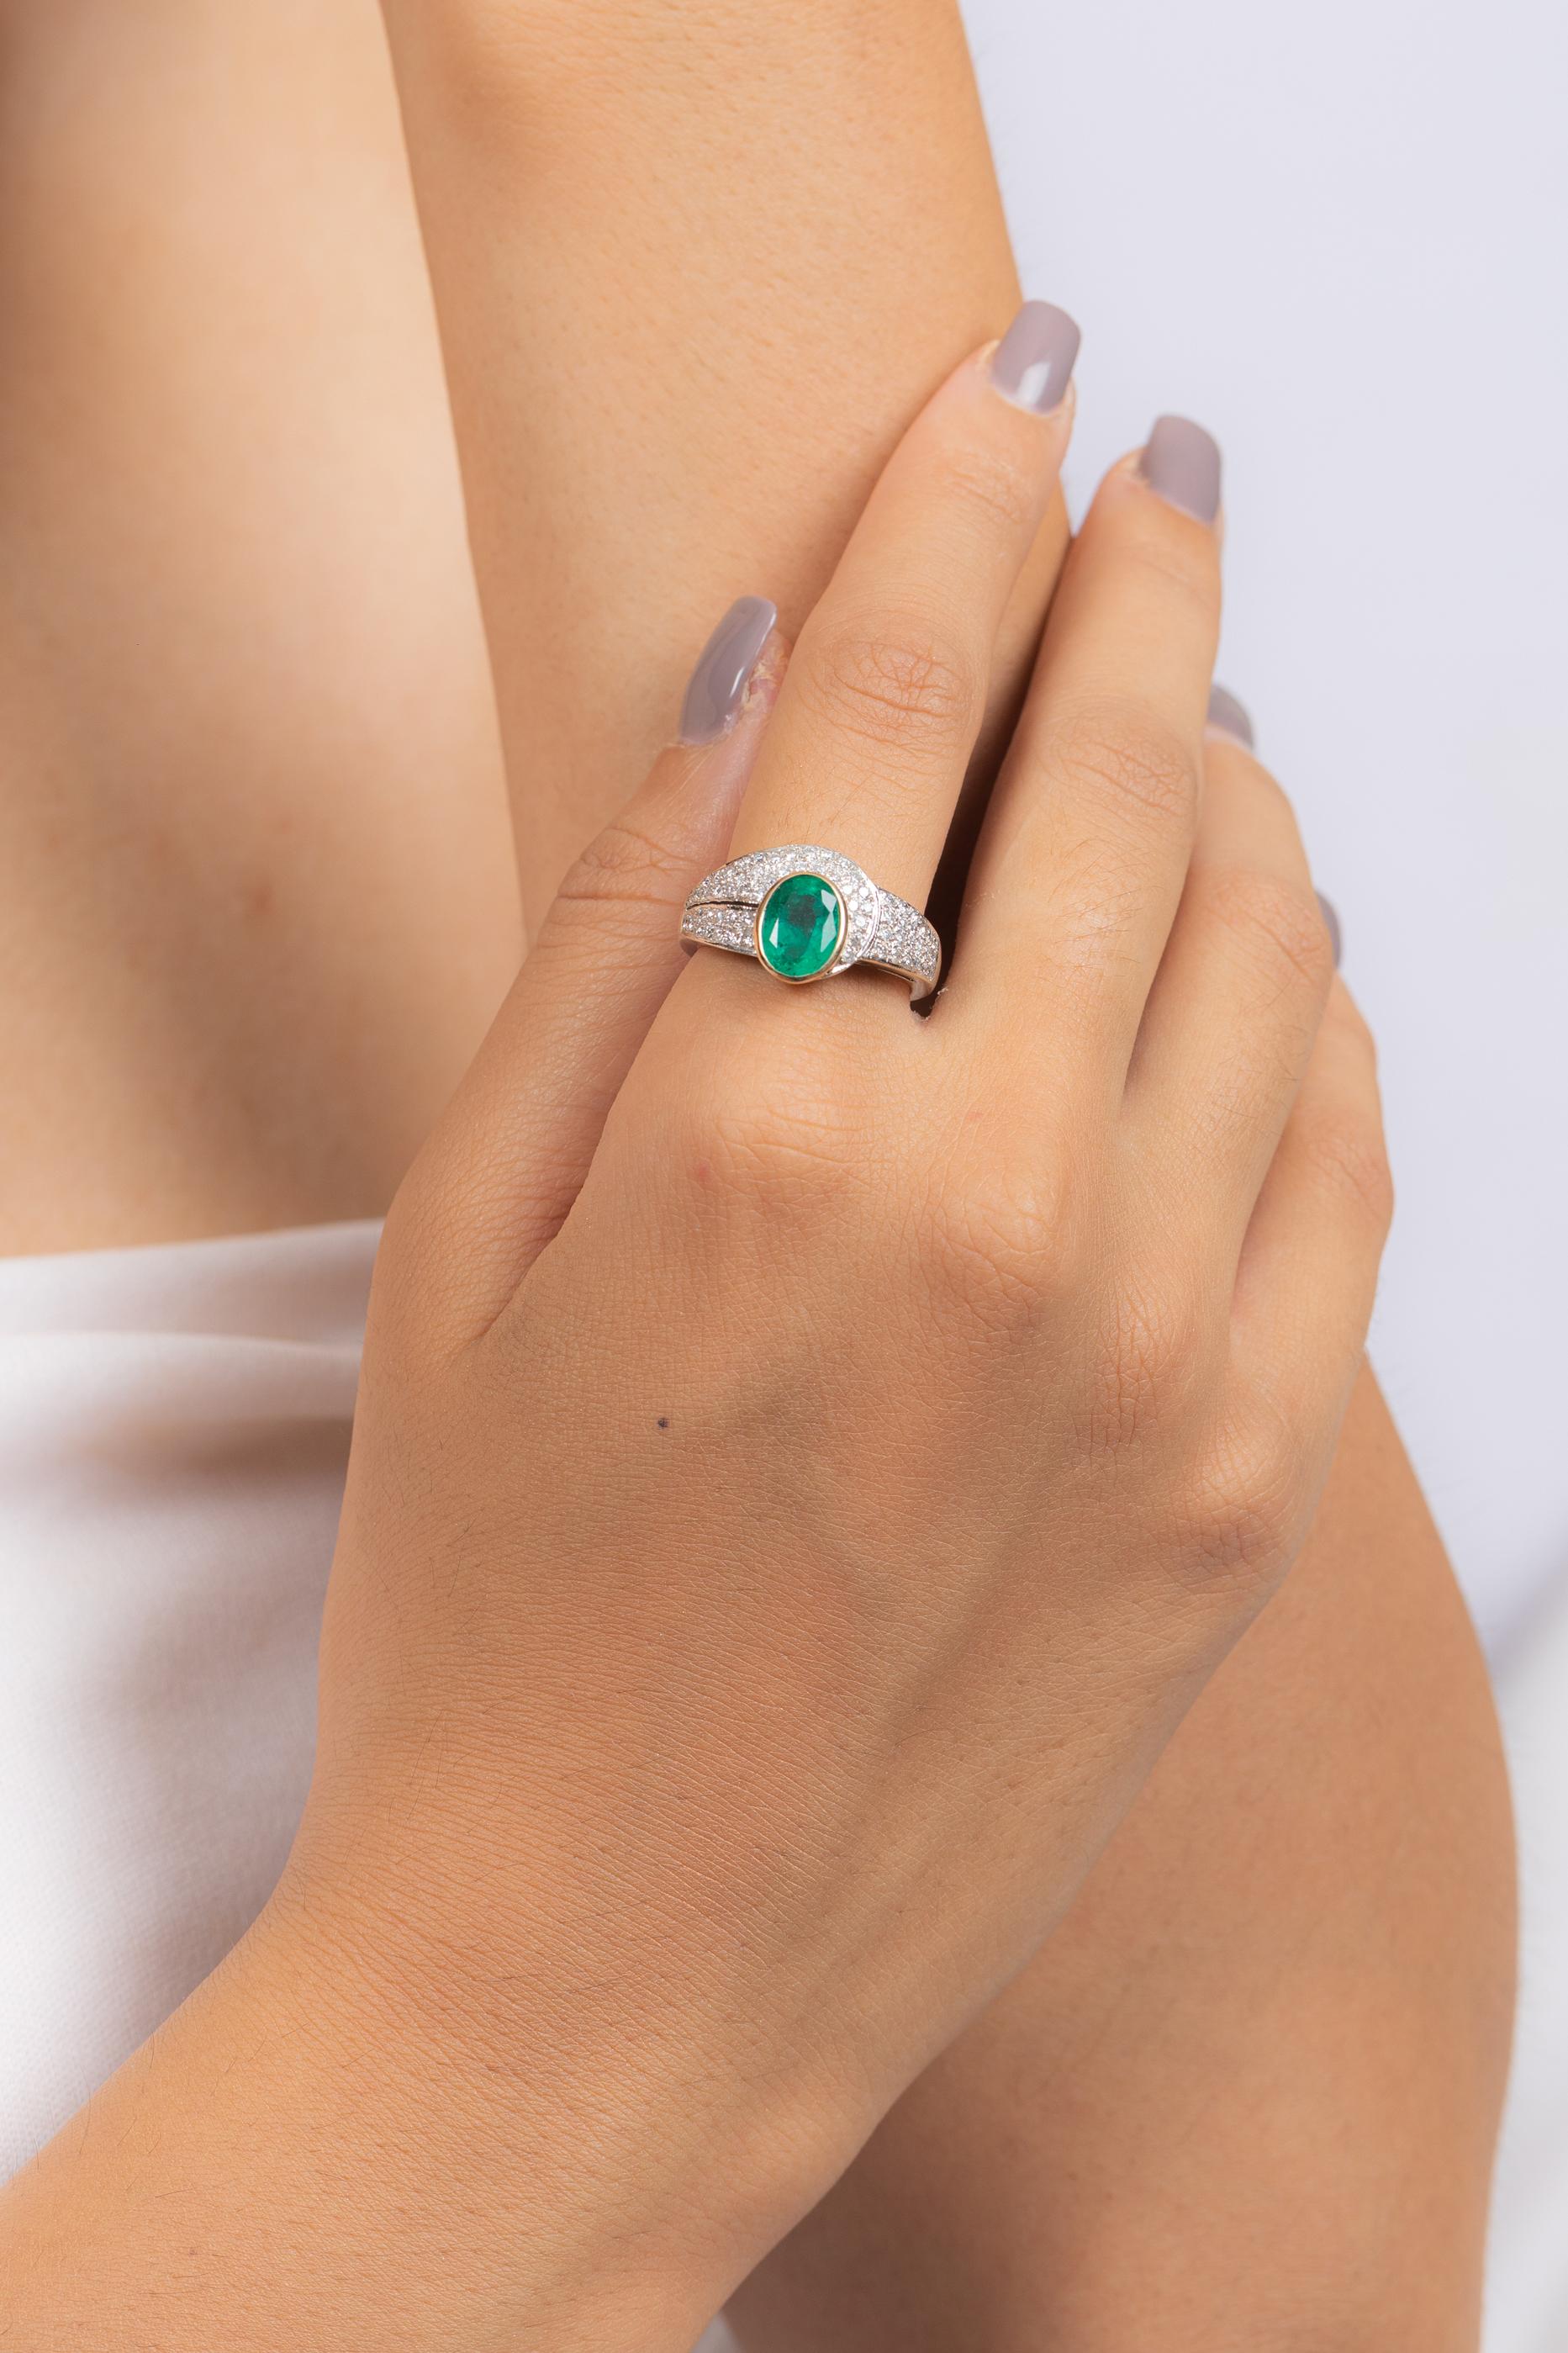 For Sale:  2.45 Carat Emerald and Diamond Ring in 18K White Gold  9